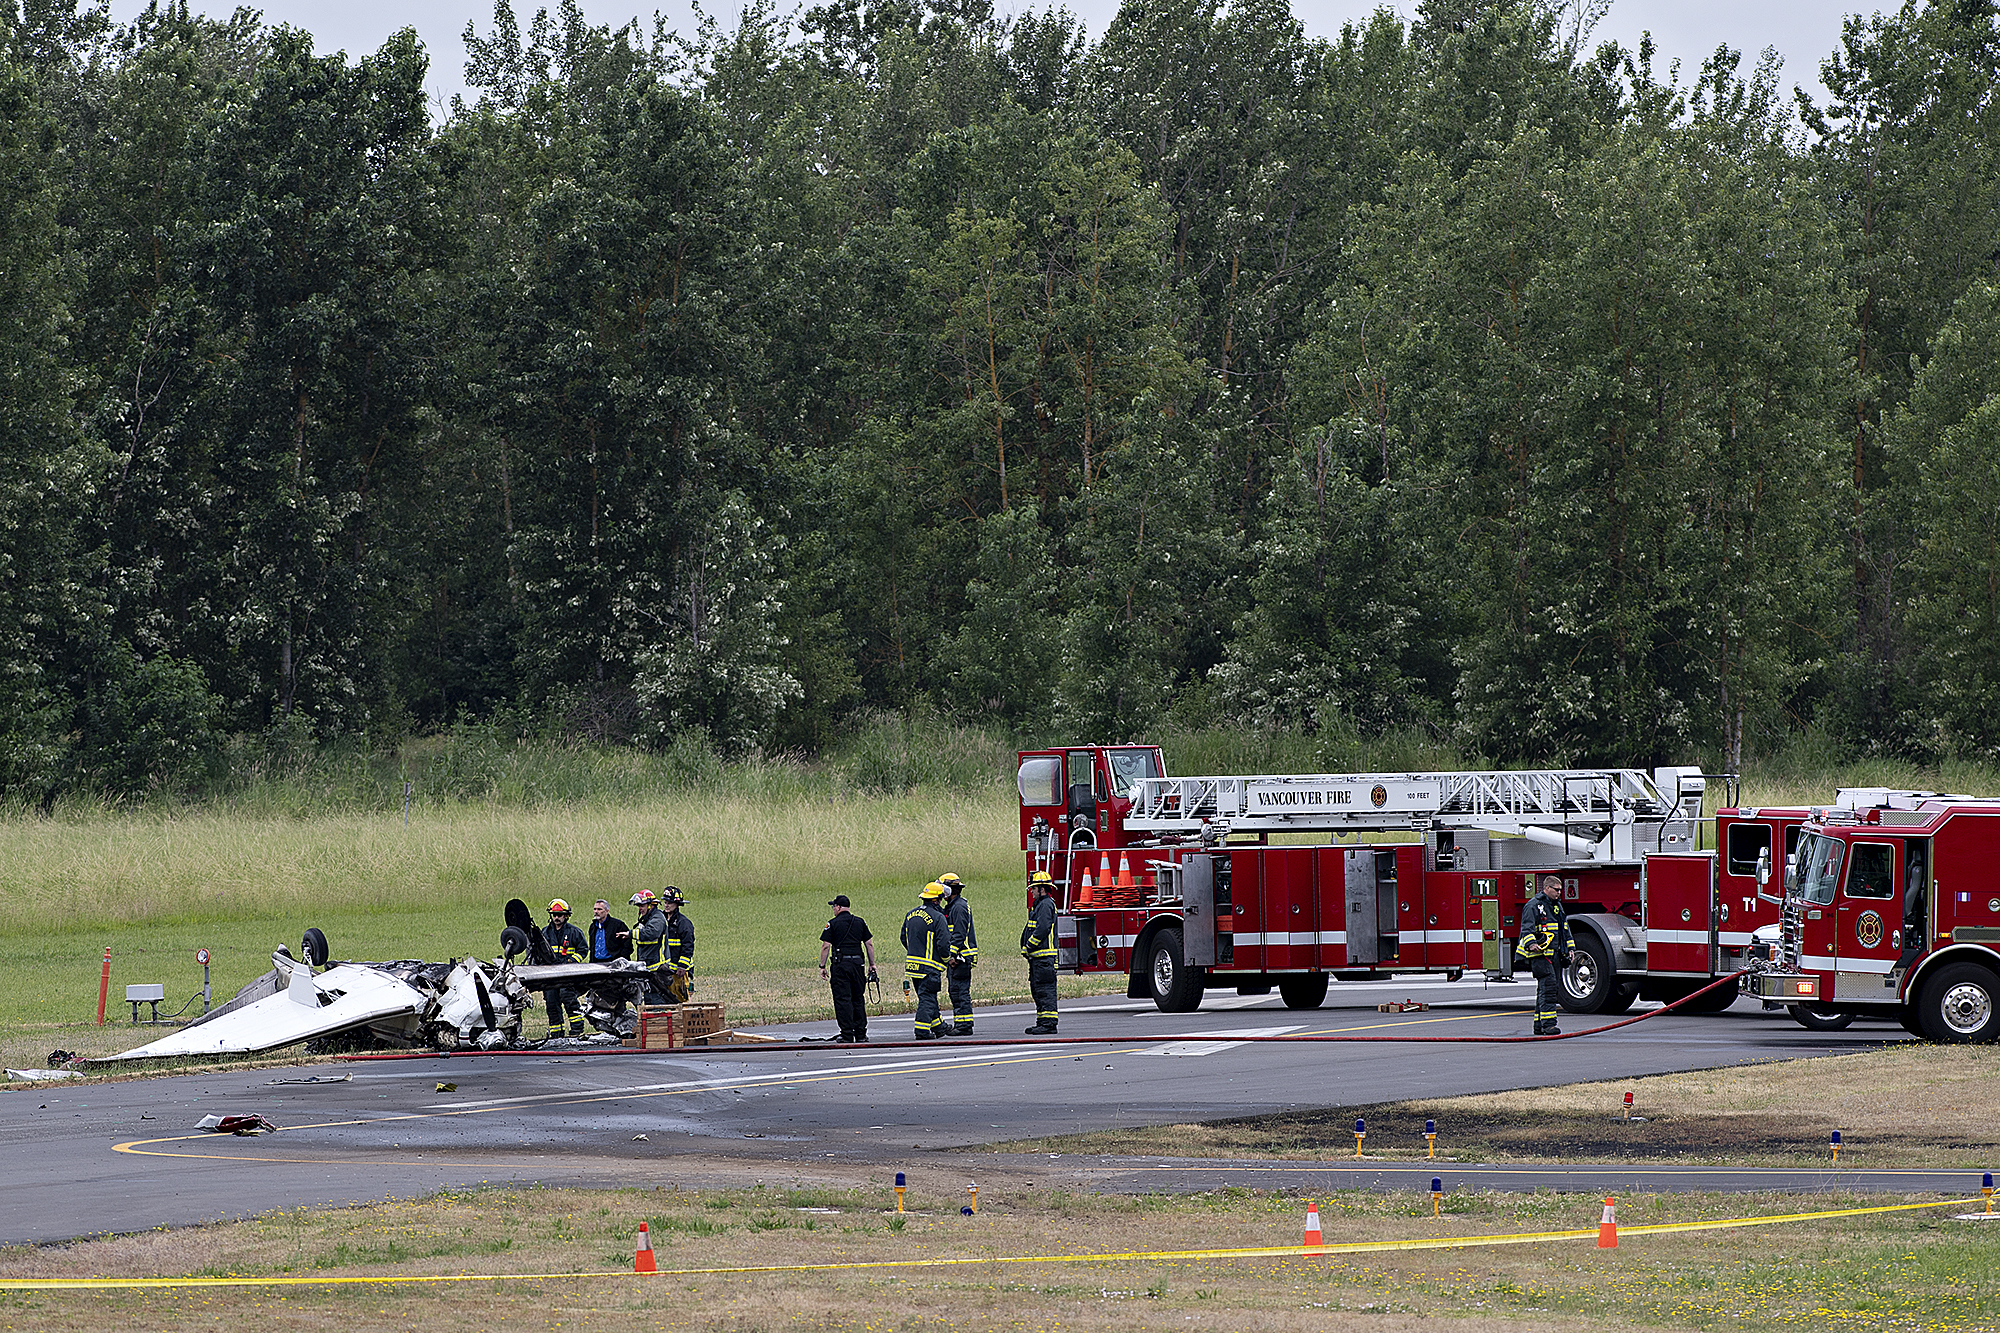 Officials look over the wreckage after a fatal plane crash at Pearson Field Airport on Tuesday morning, June 28, 2022.